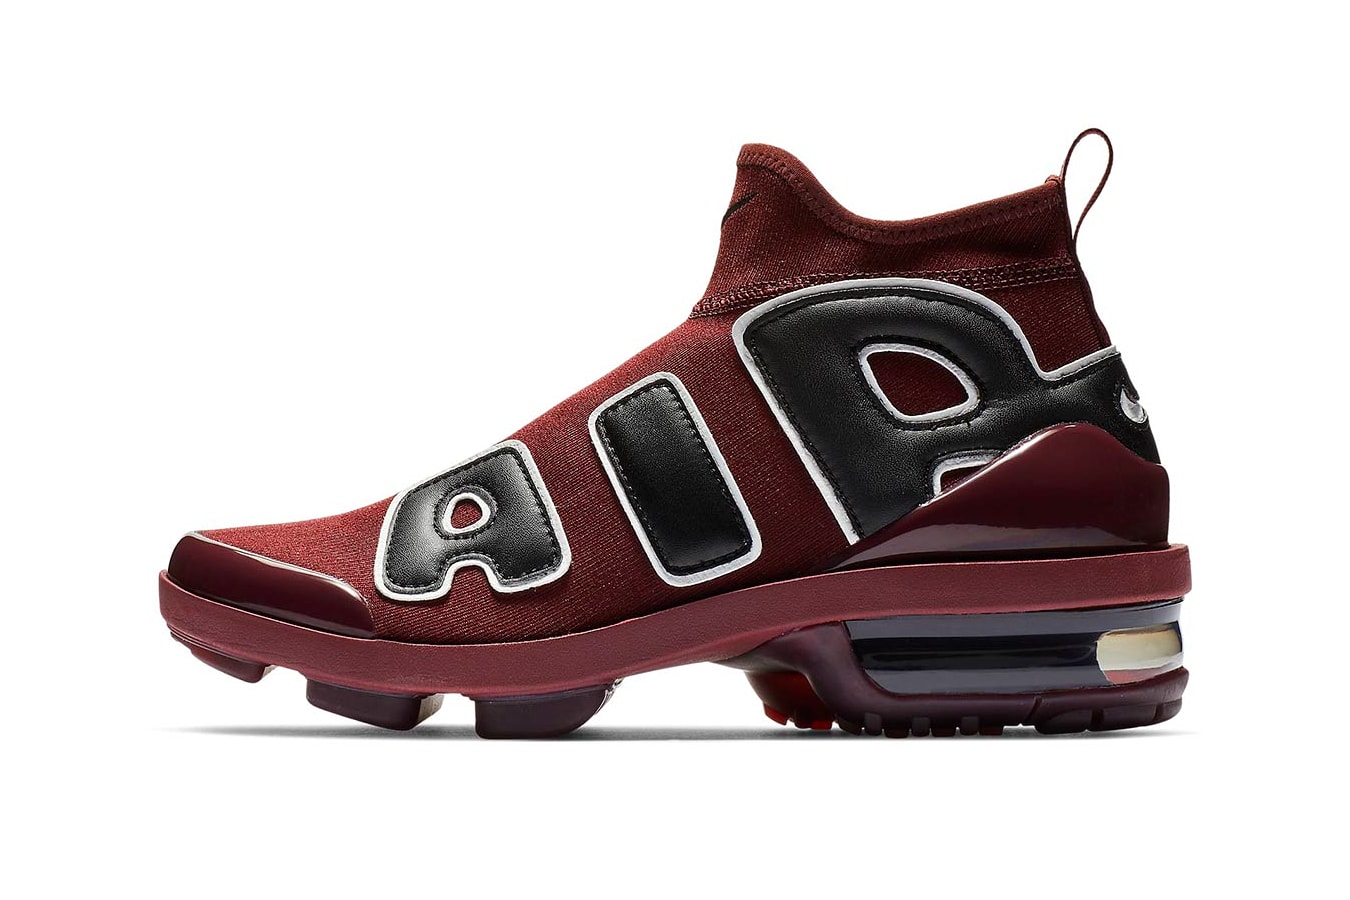  Nike Airquent "Black/Burgundy" Release Date price sneaker 